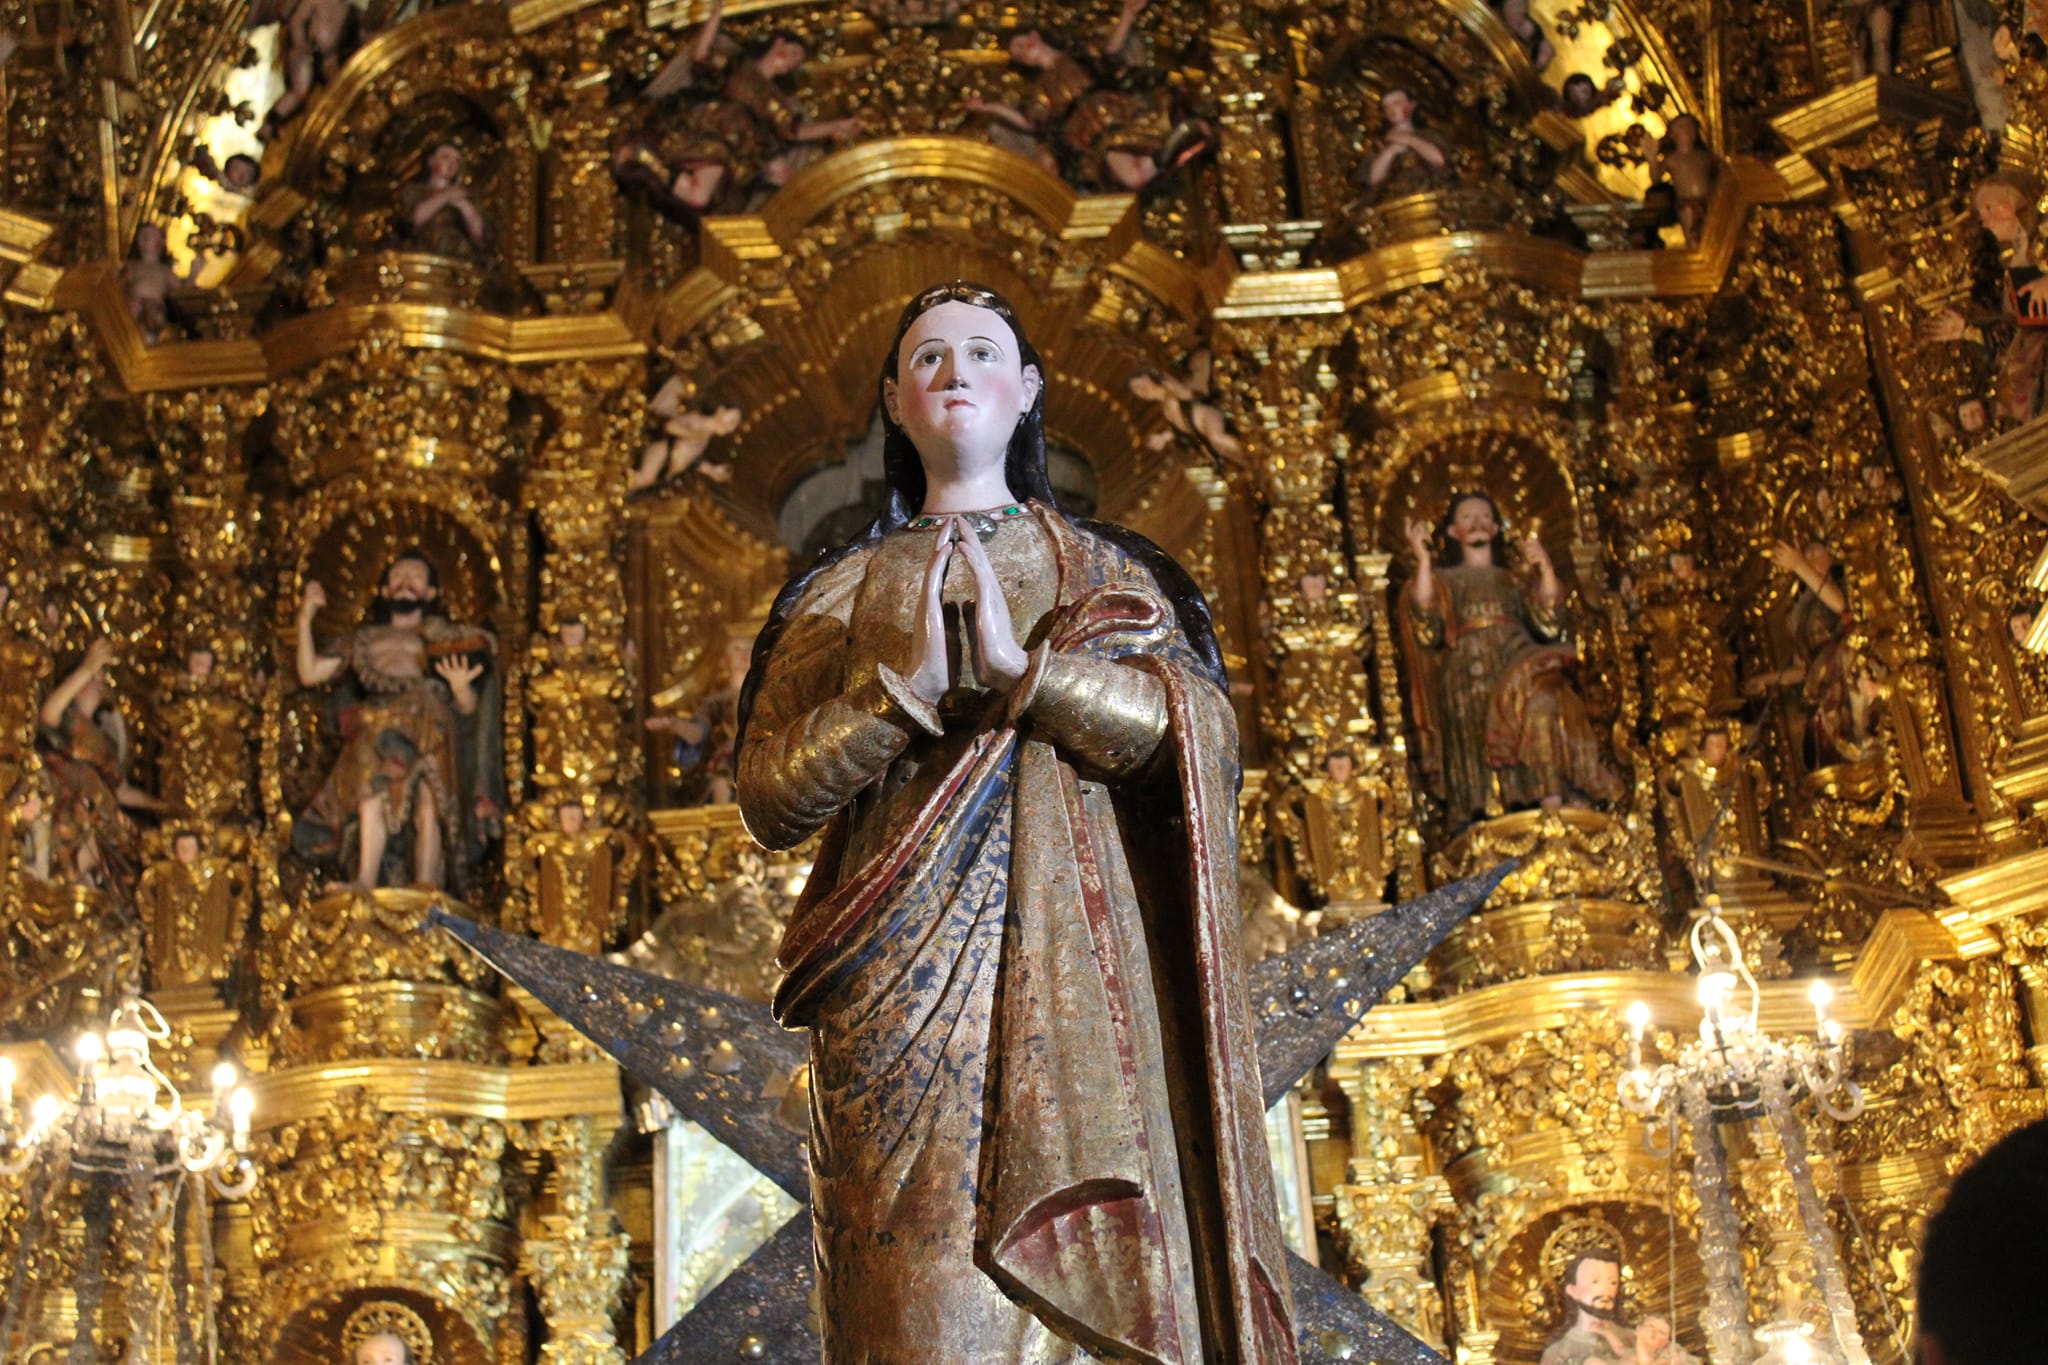 The baroque art altarpieces of the Sanctuary and Basilica of Ocotlán in Tlaxcala (Photo: facebook/Basilica of Our Lady of Ocotlán, Tlaxcala)